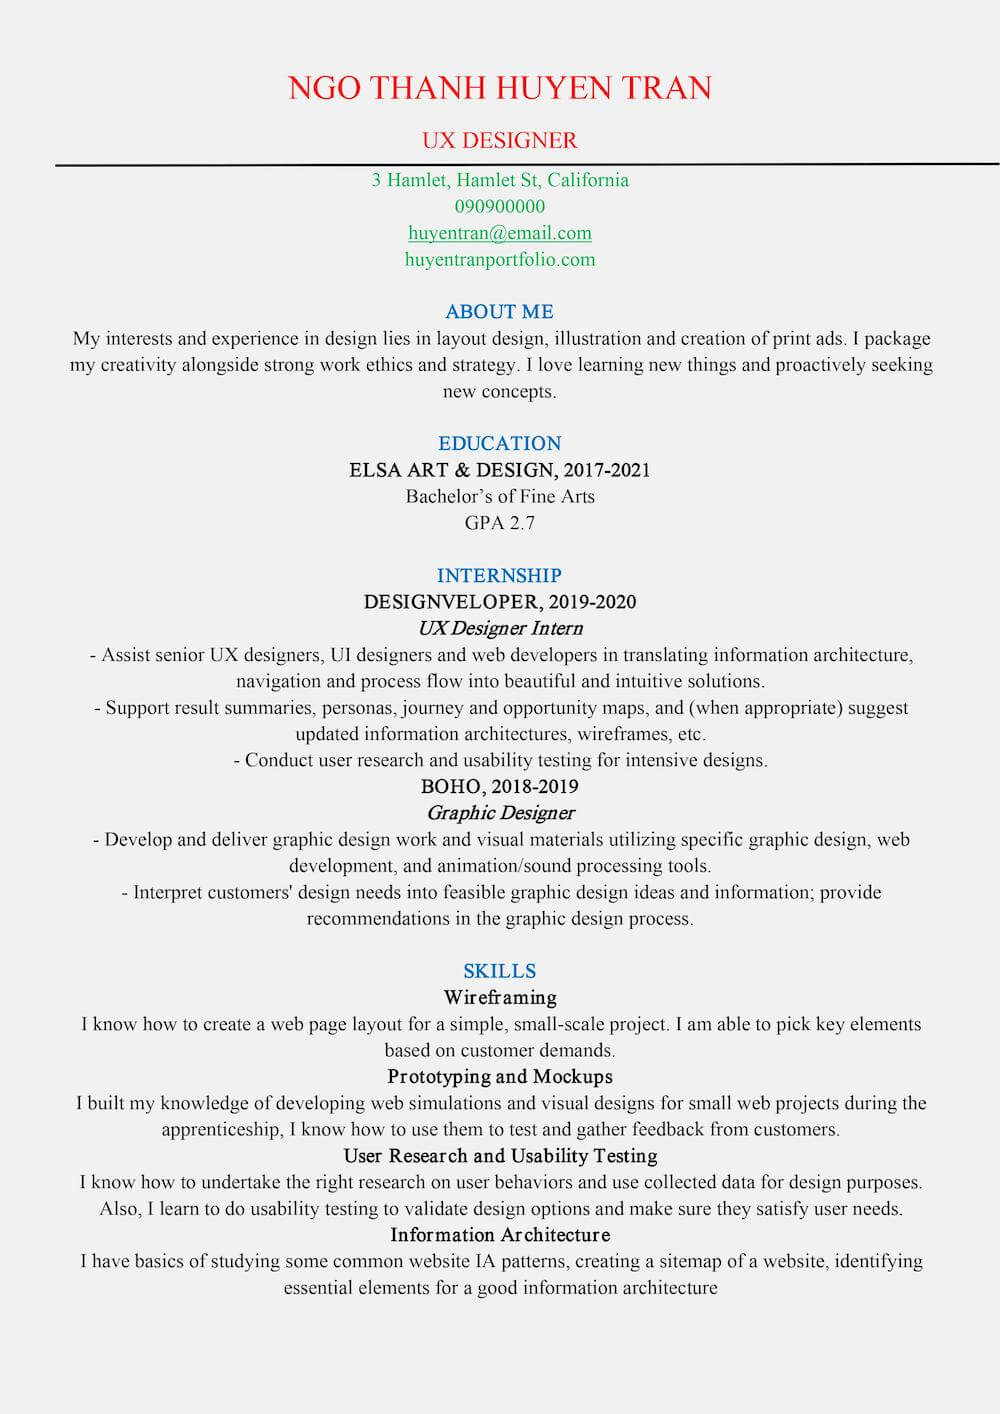 Bad Resume Examples: Popular Mistake You Should Avoid